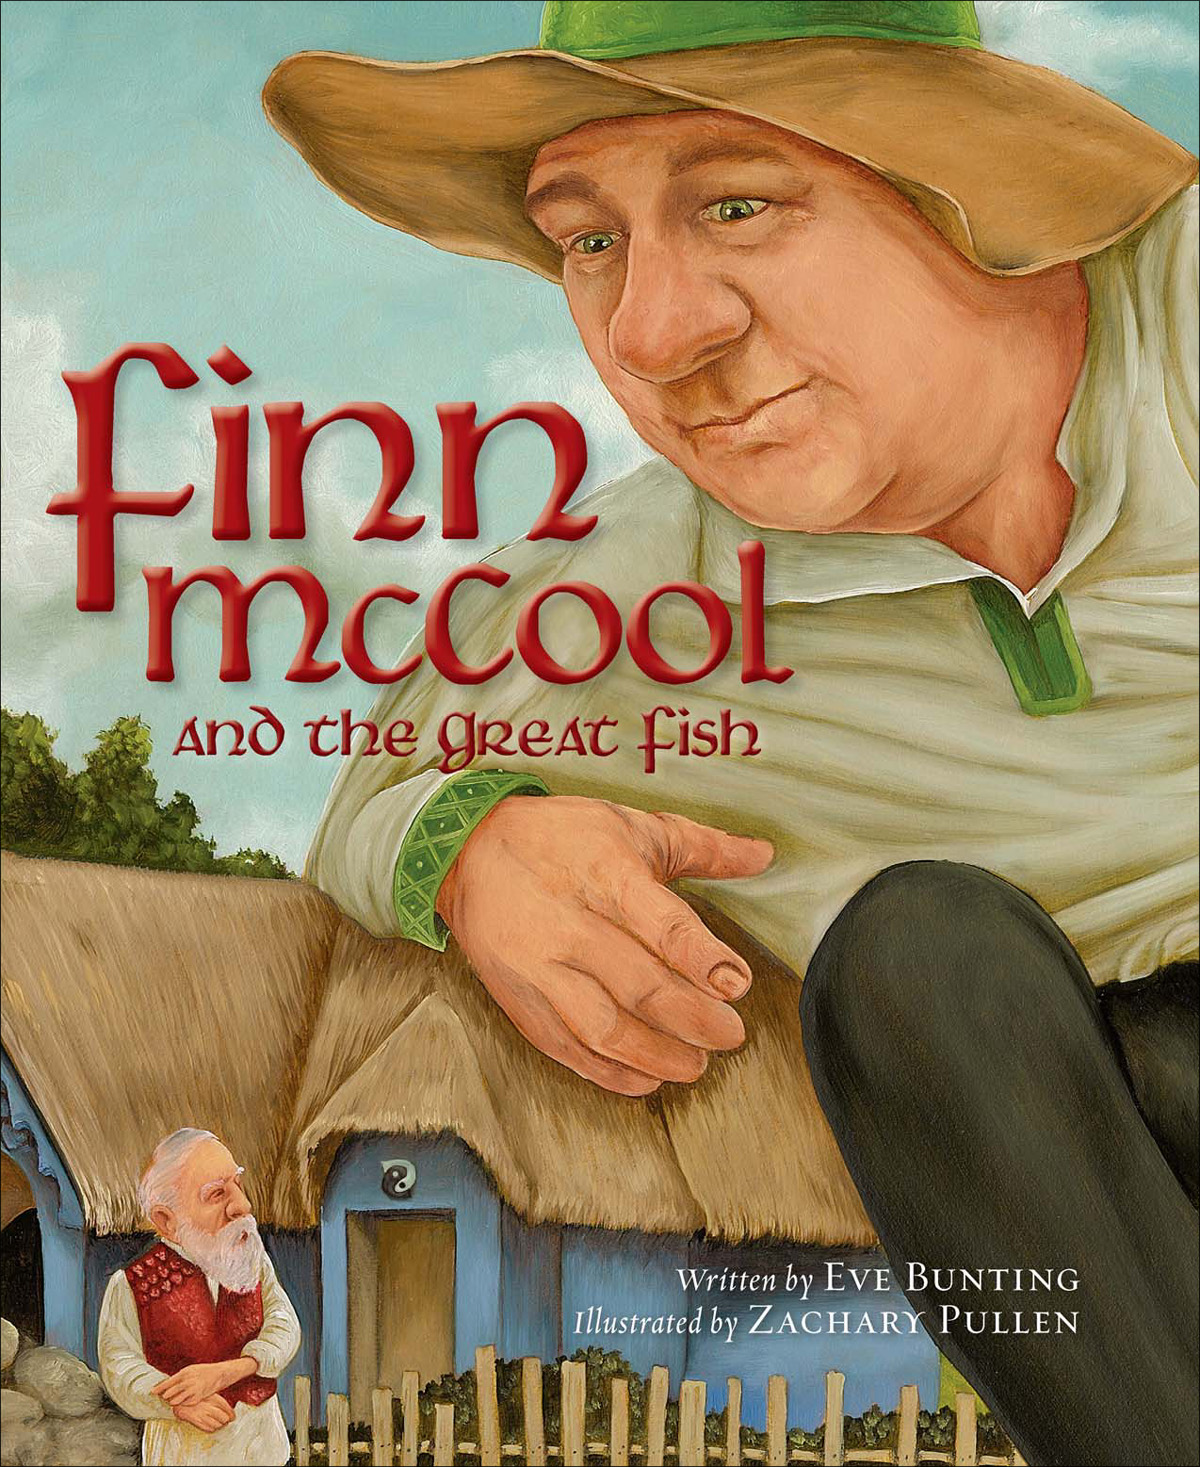 Finn McCool and the Great Fish (2010) by Eve Bunting